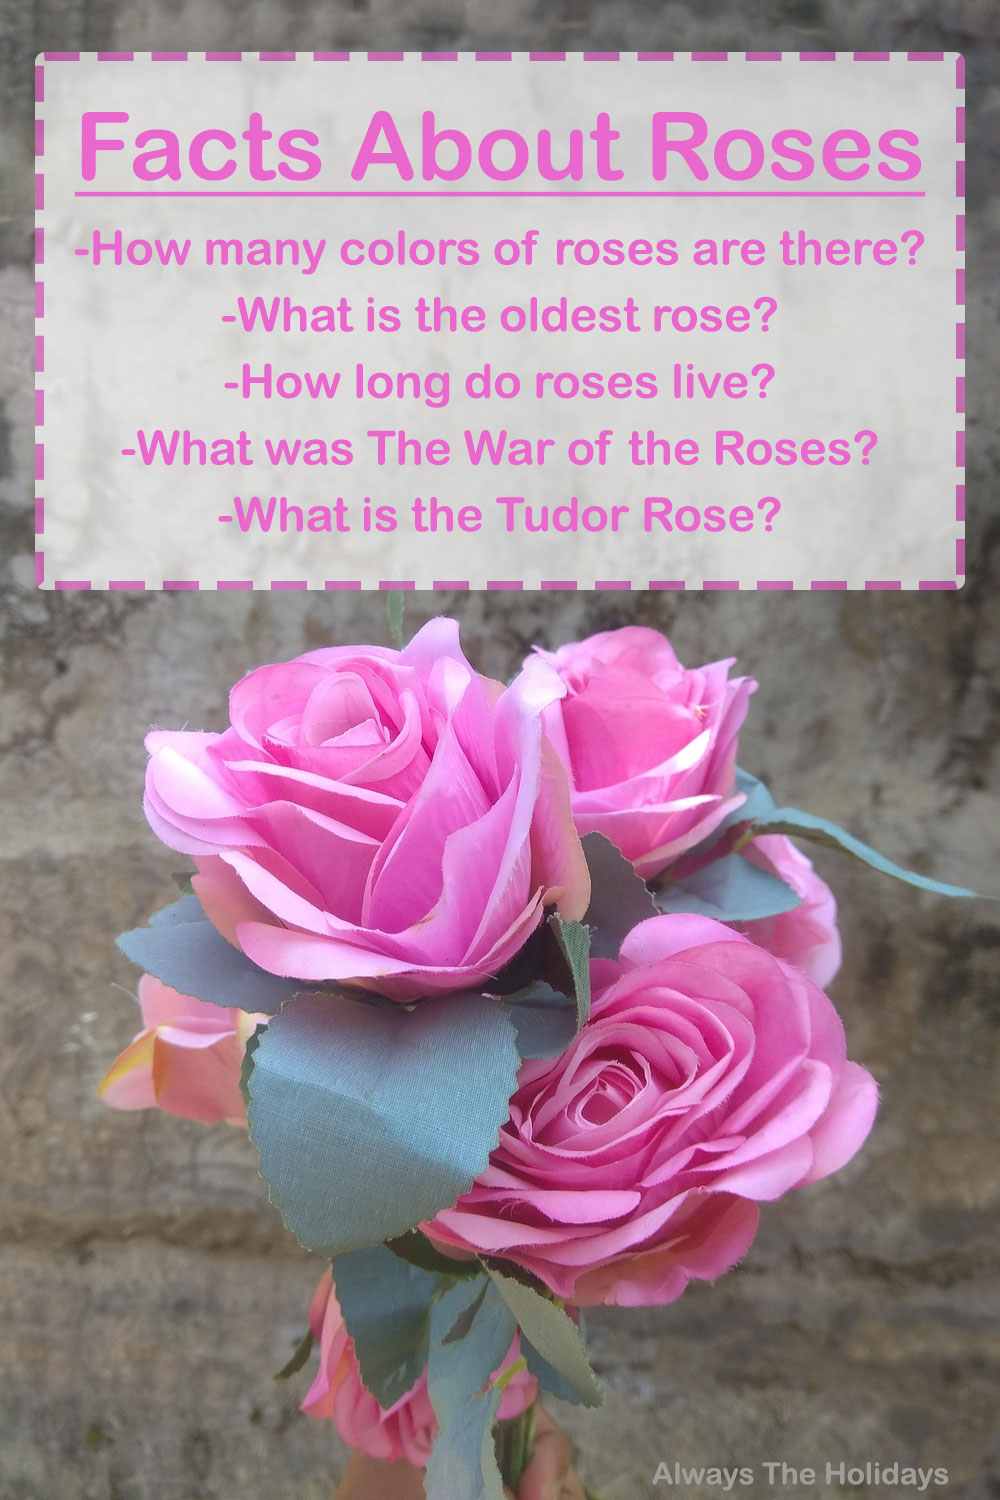 A bouquet of pink roses against a cement wall with a text overlay with questions and facts about roses.